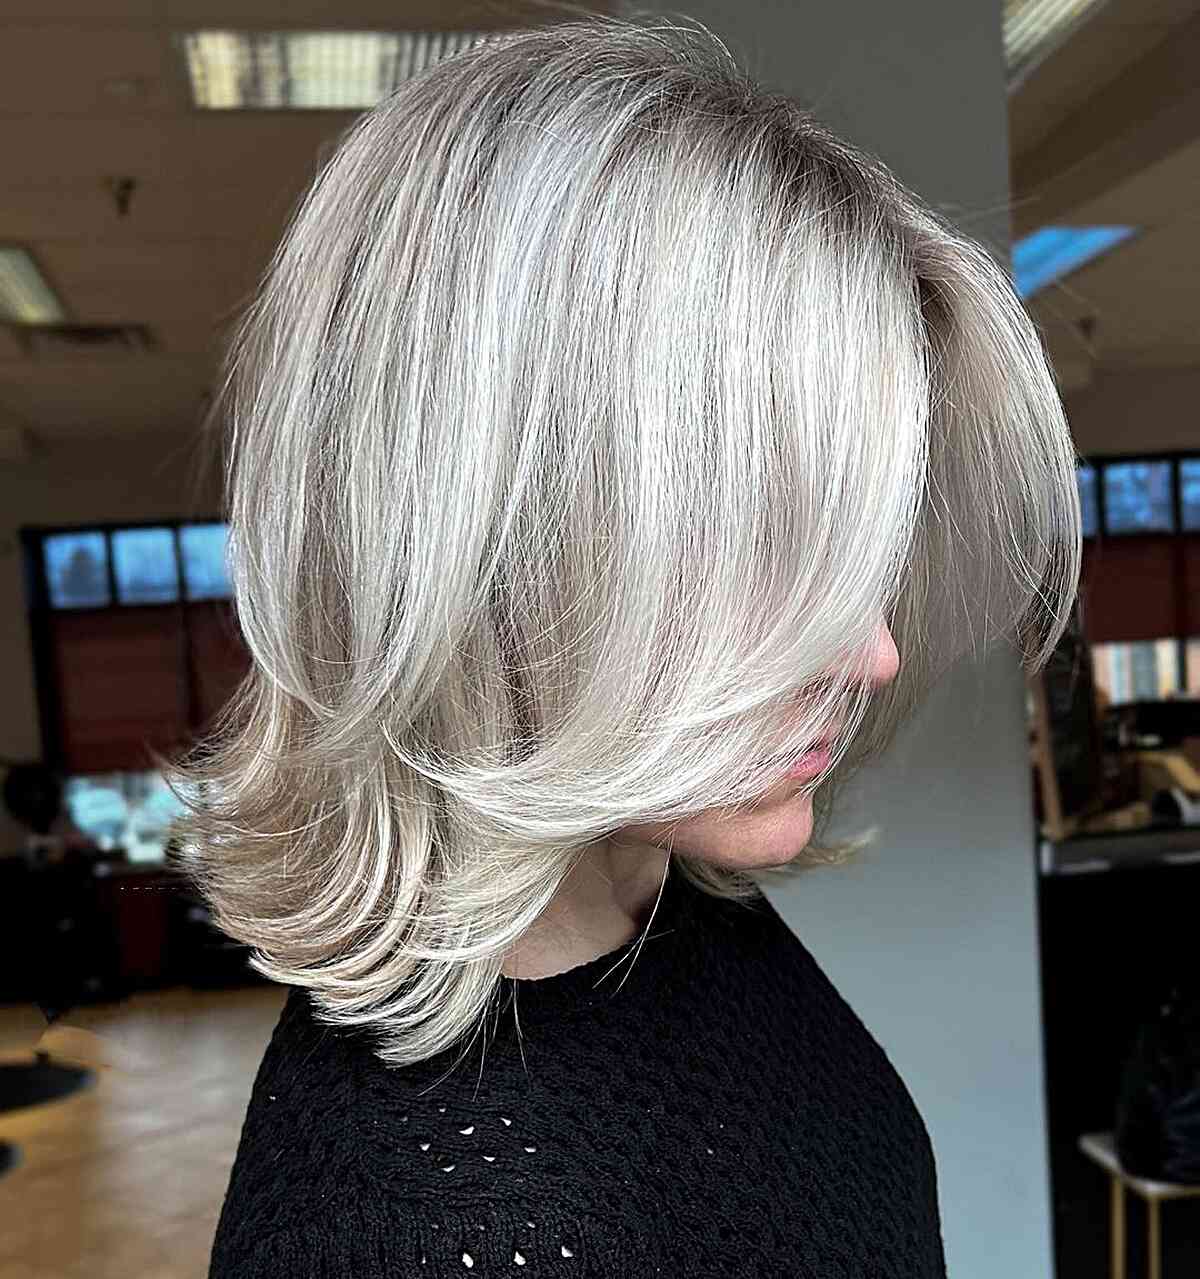 Best Haircuts for Women 2023: 64 Popular Haircut Ideas to Try | Glamour